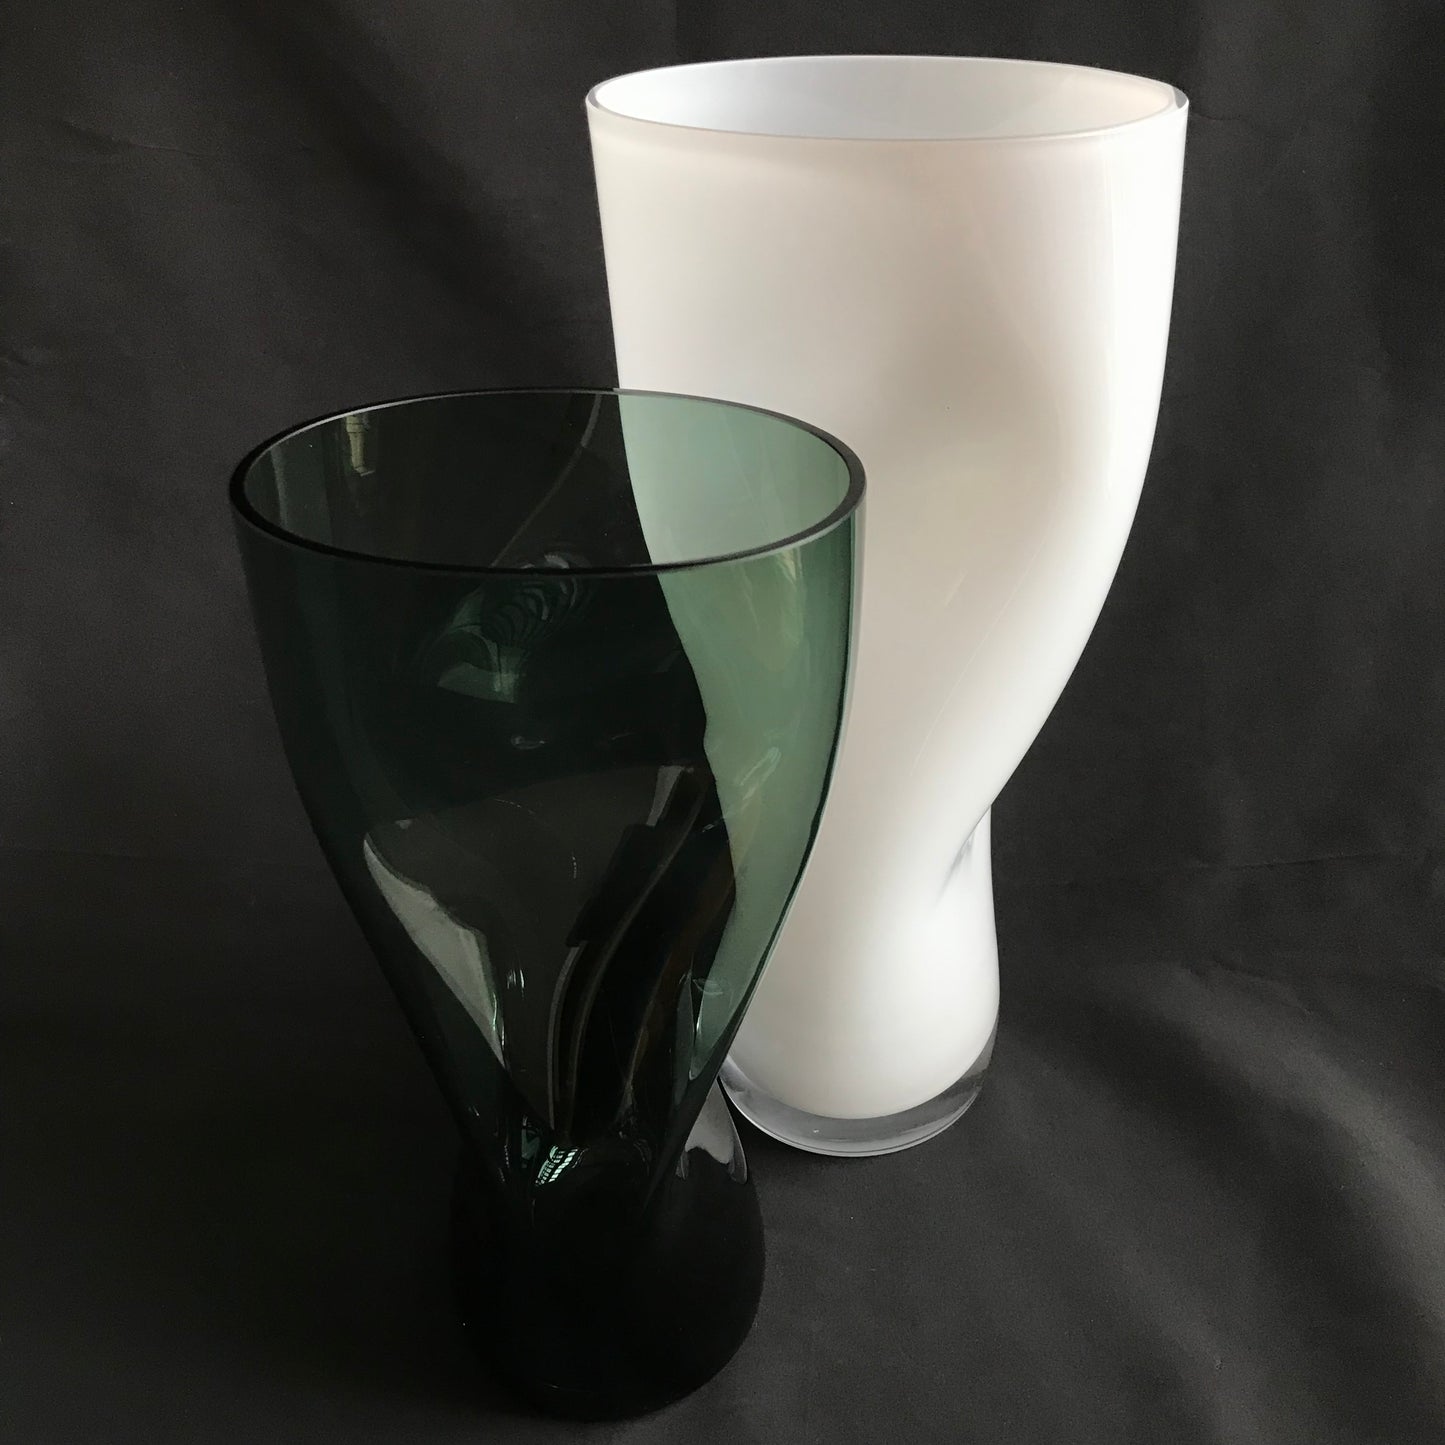 Green Glass “Squeeze Vase” by Orrefors.